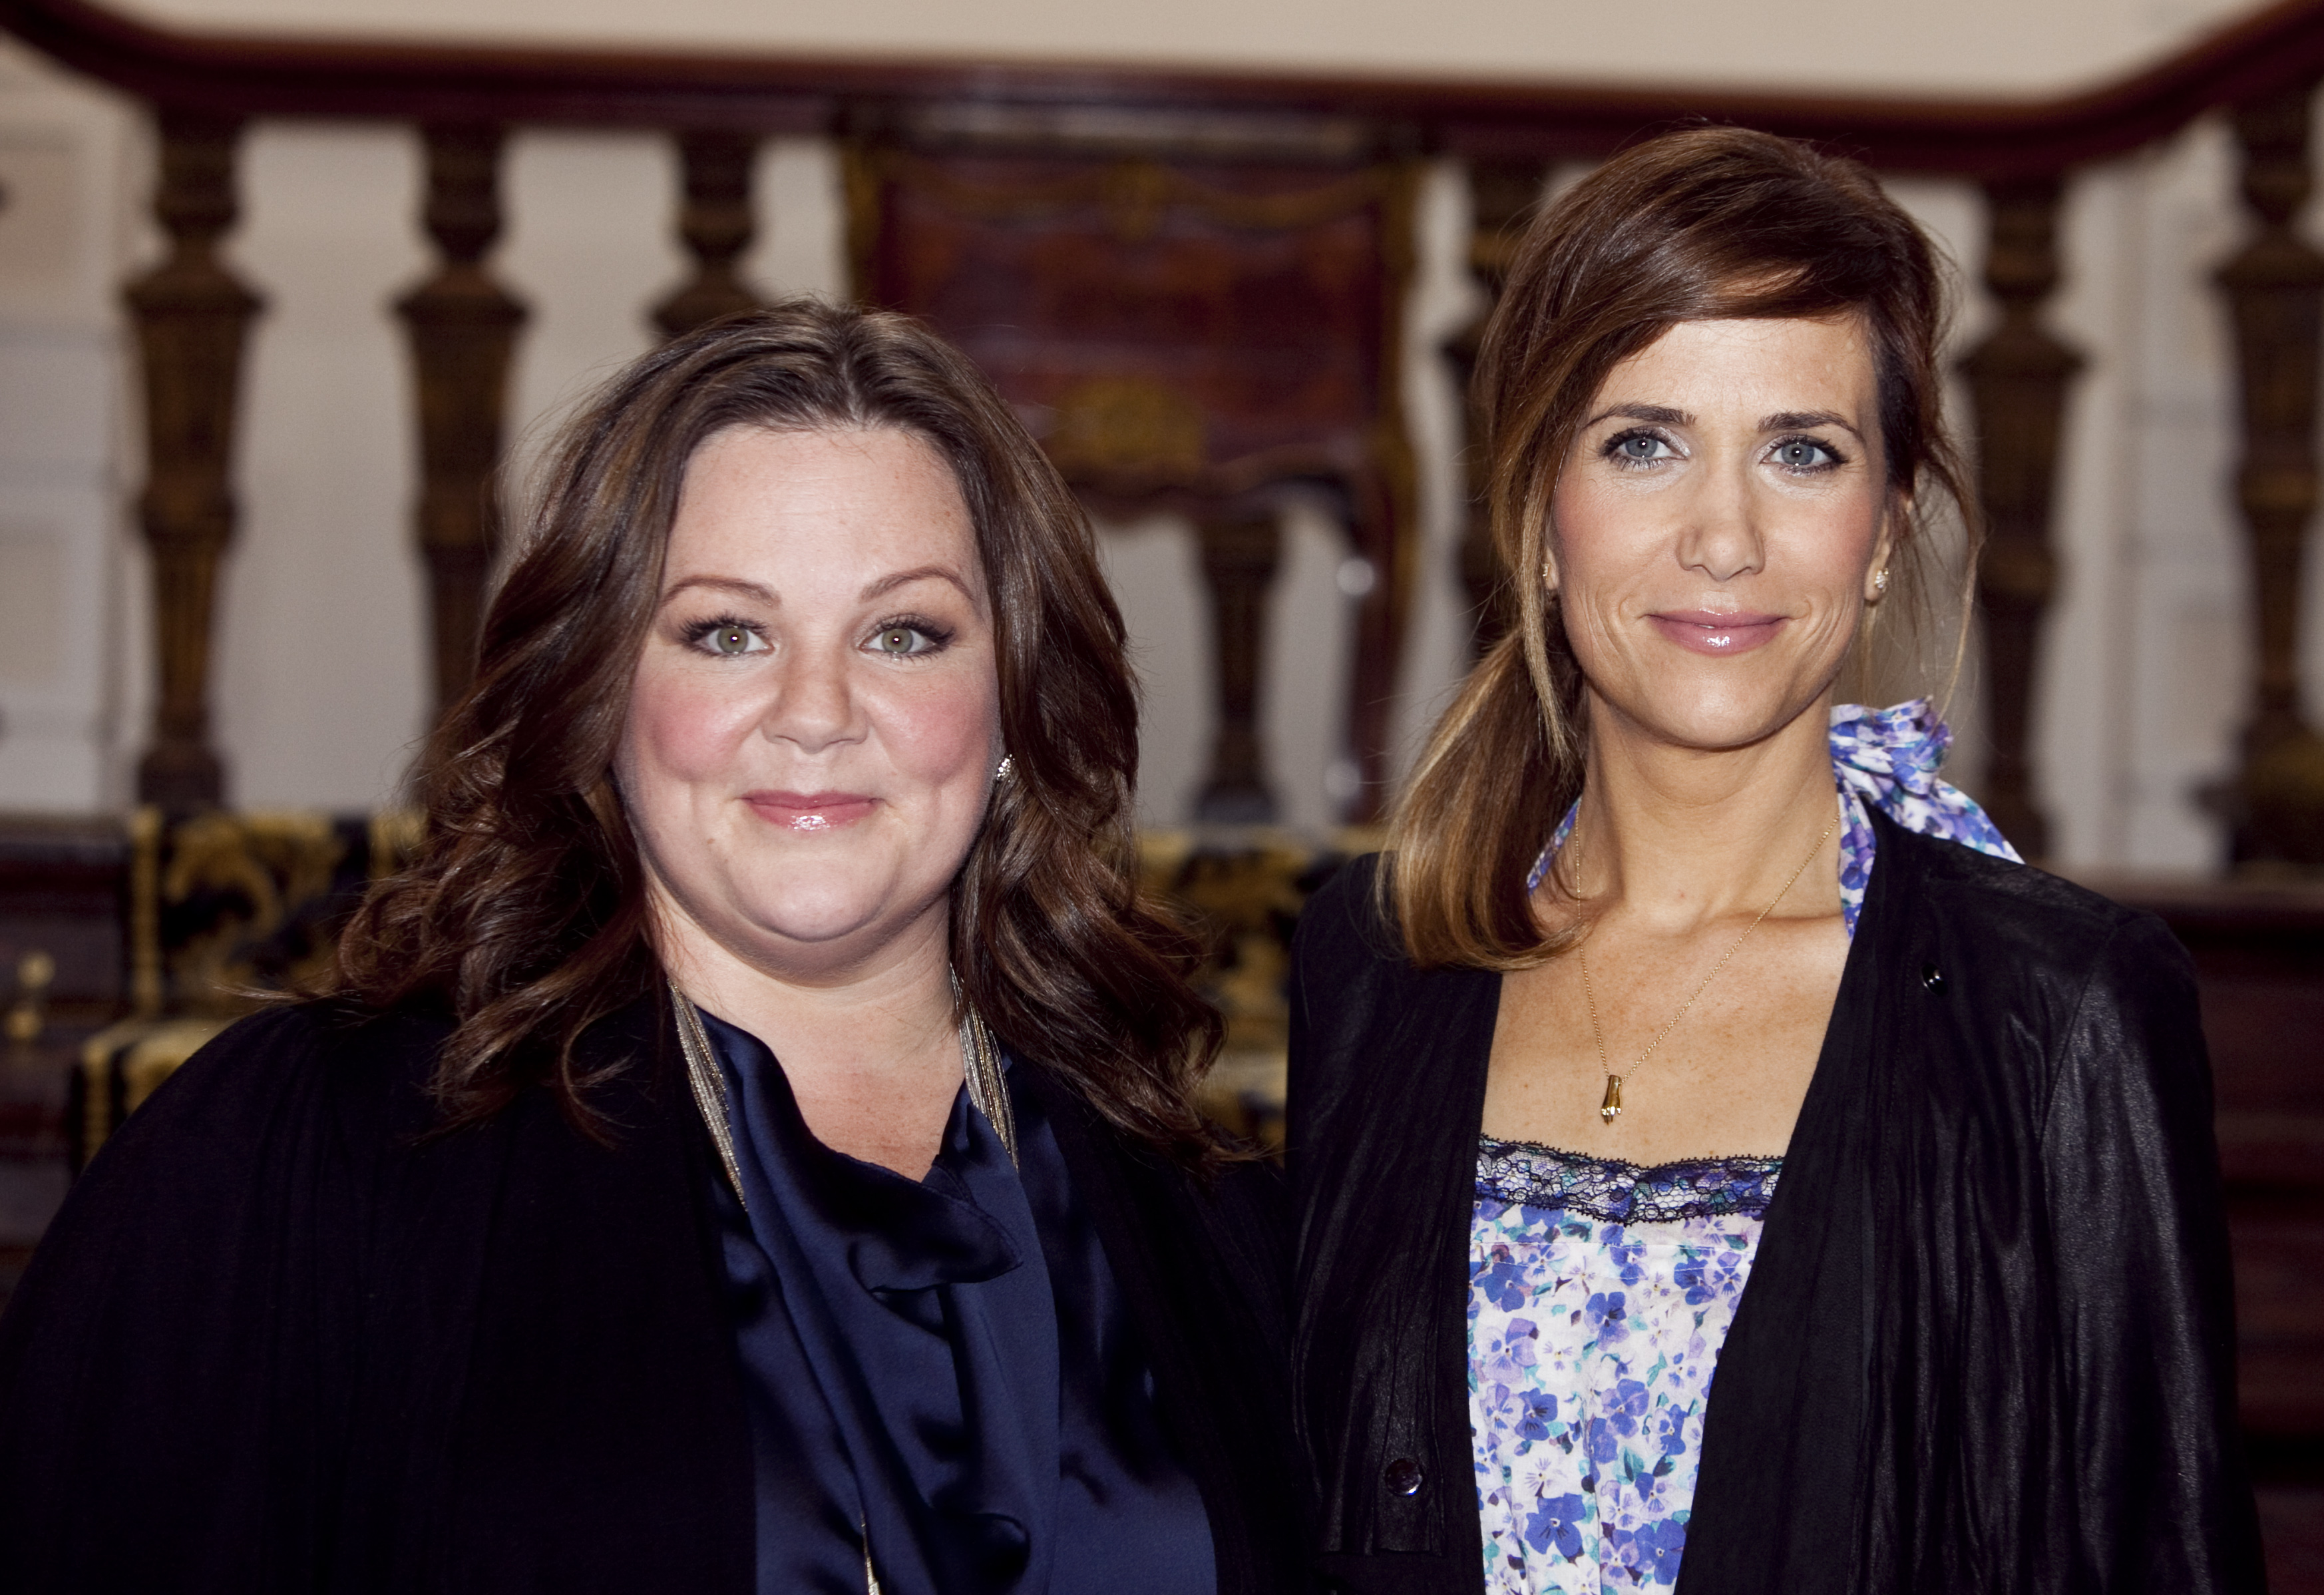 Melissa Mc Carthy and Kristen Wiig attend the photocall for 'Bridesmaids' (Helene Wiesenhaan—Getty Images)